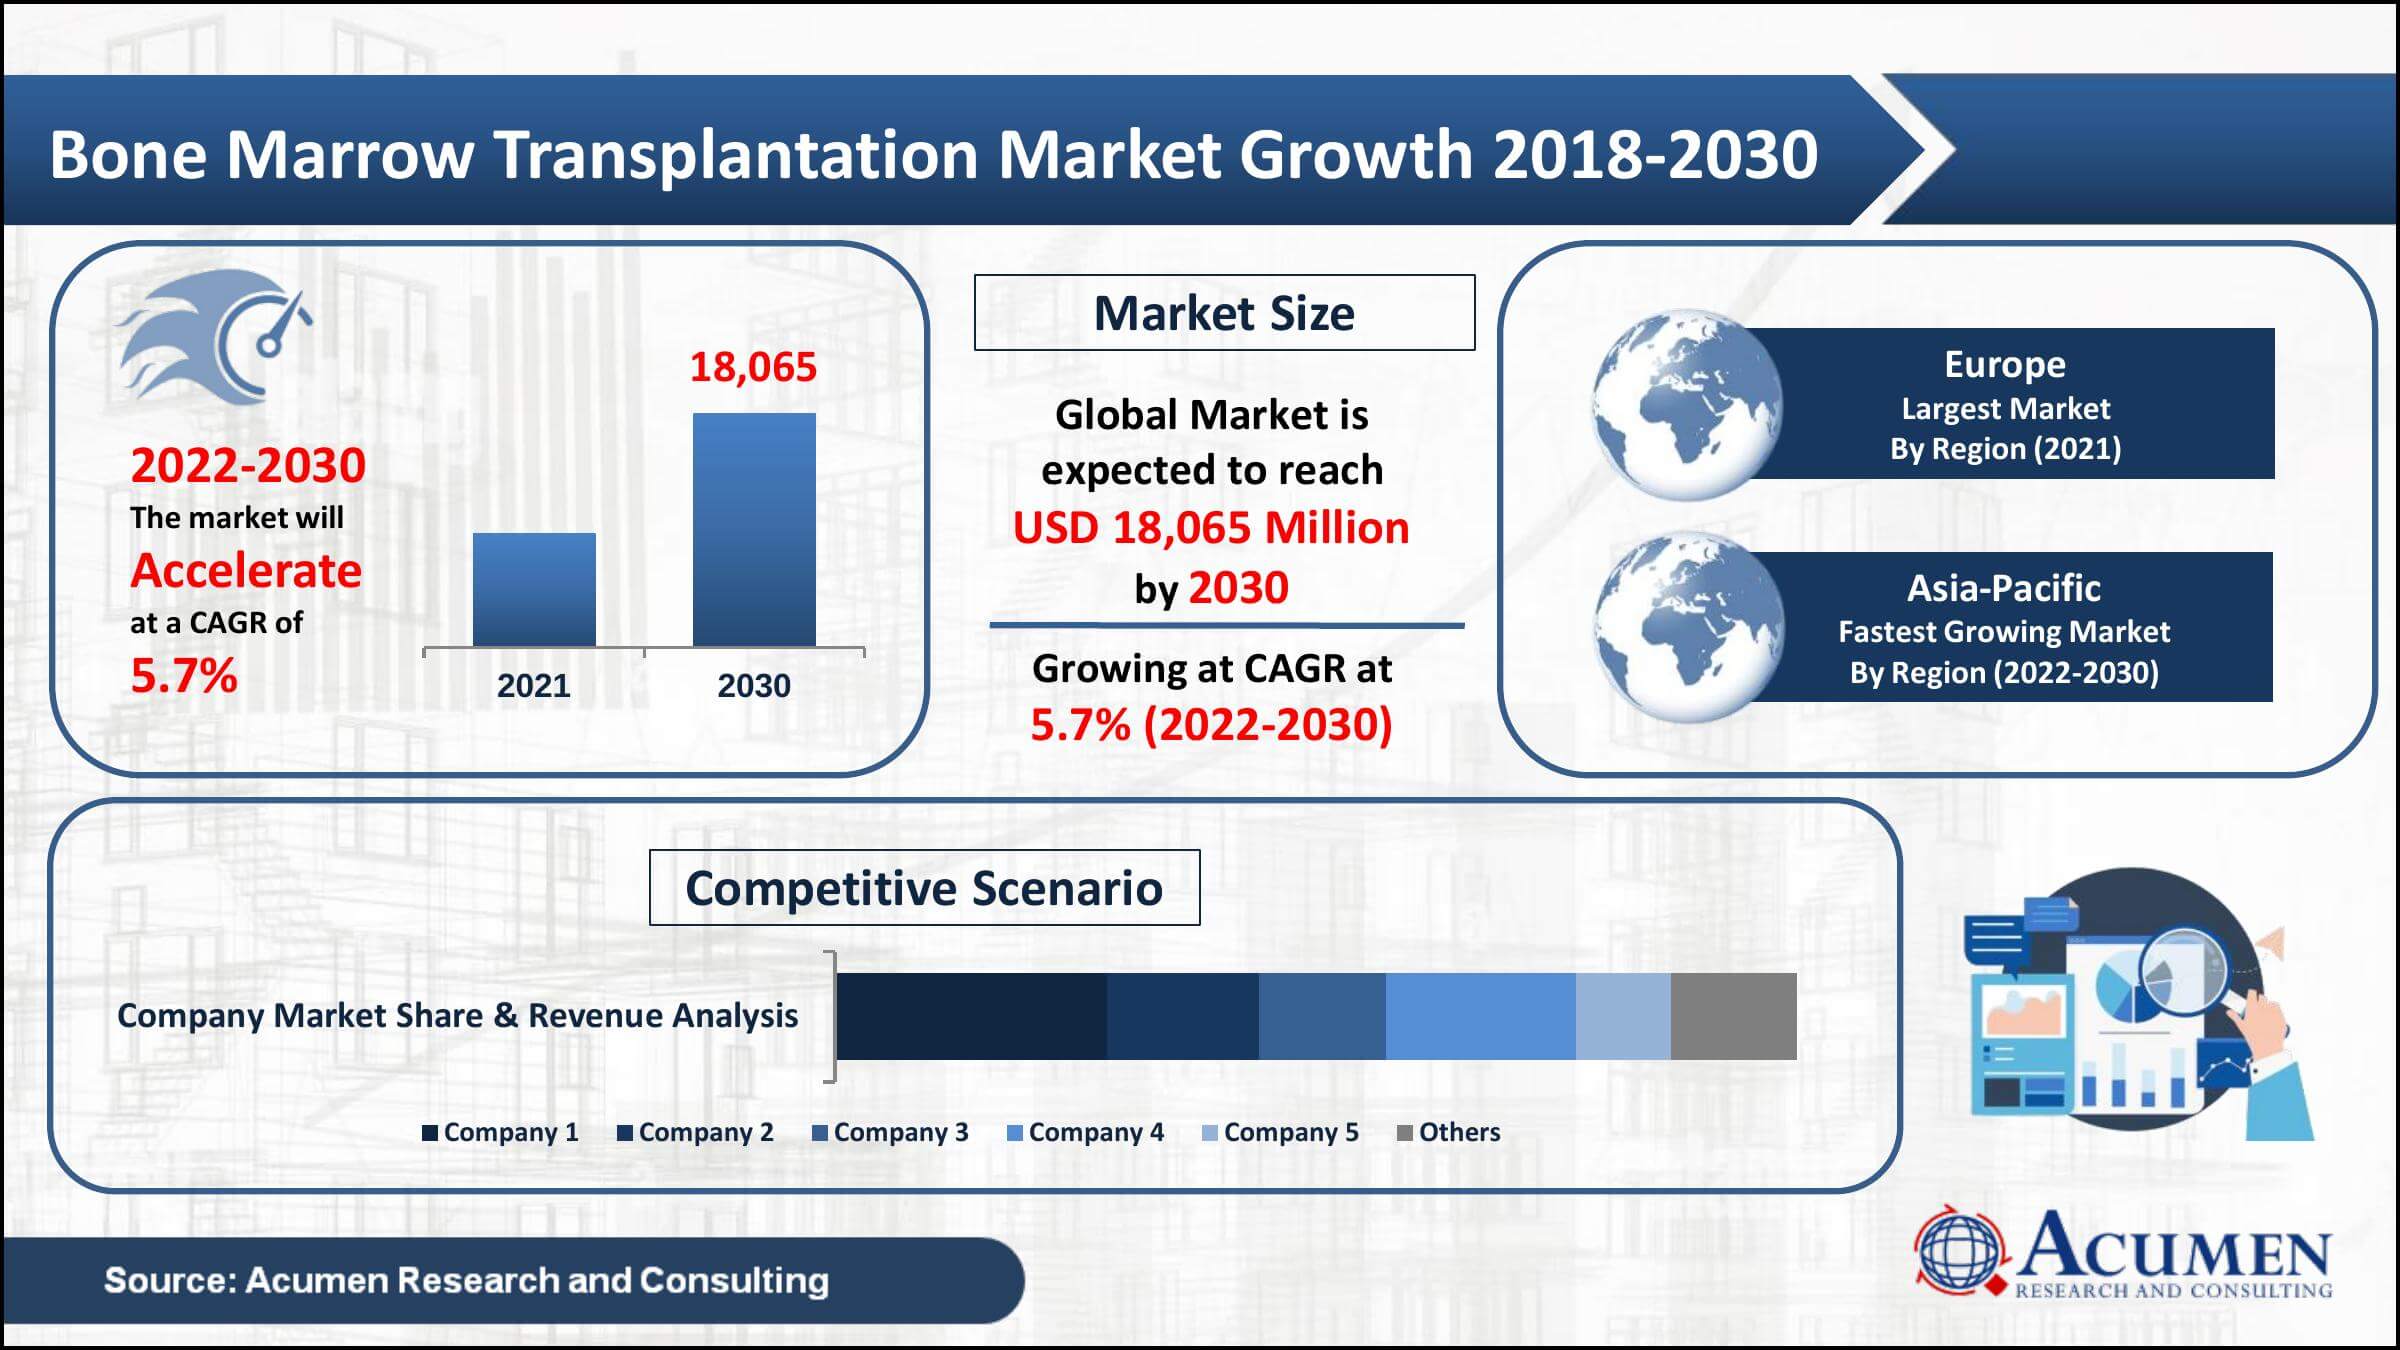 Global bone marrow transplantation market value was worth USD 11.1 Billion in 2021, with a 5.7% CAGR from 2022 to 2030